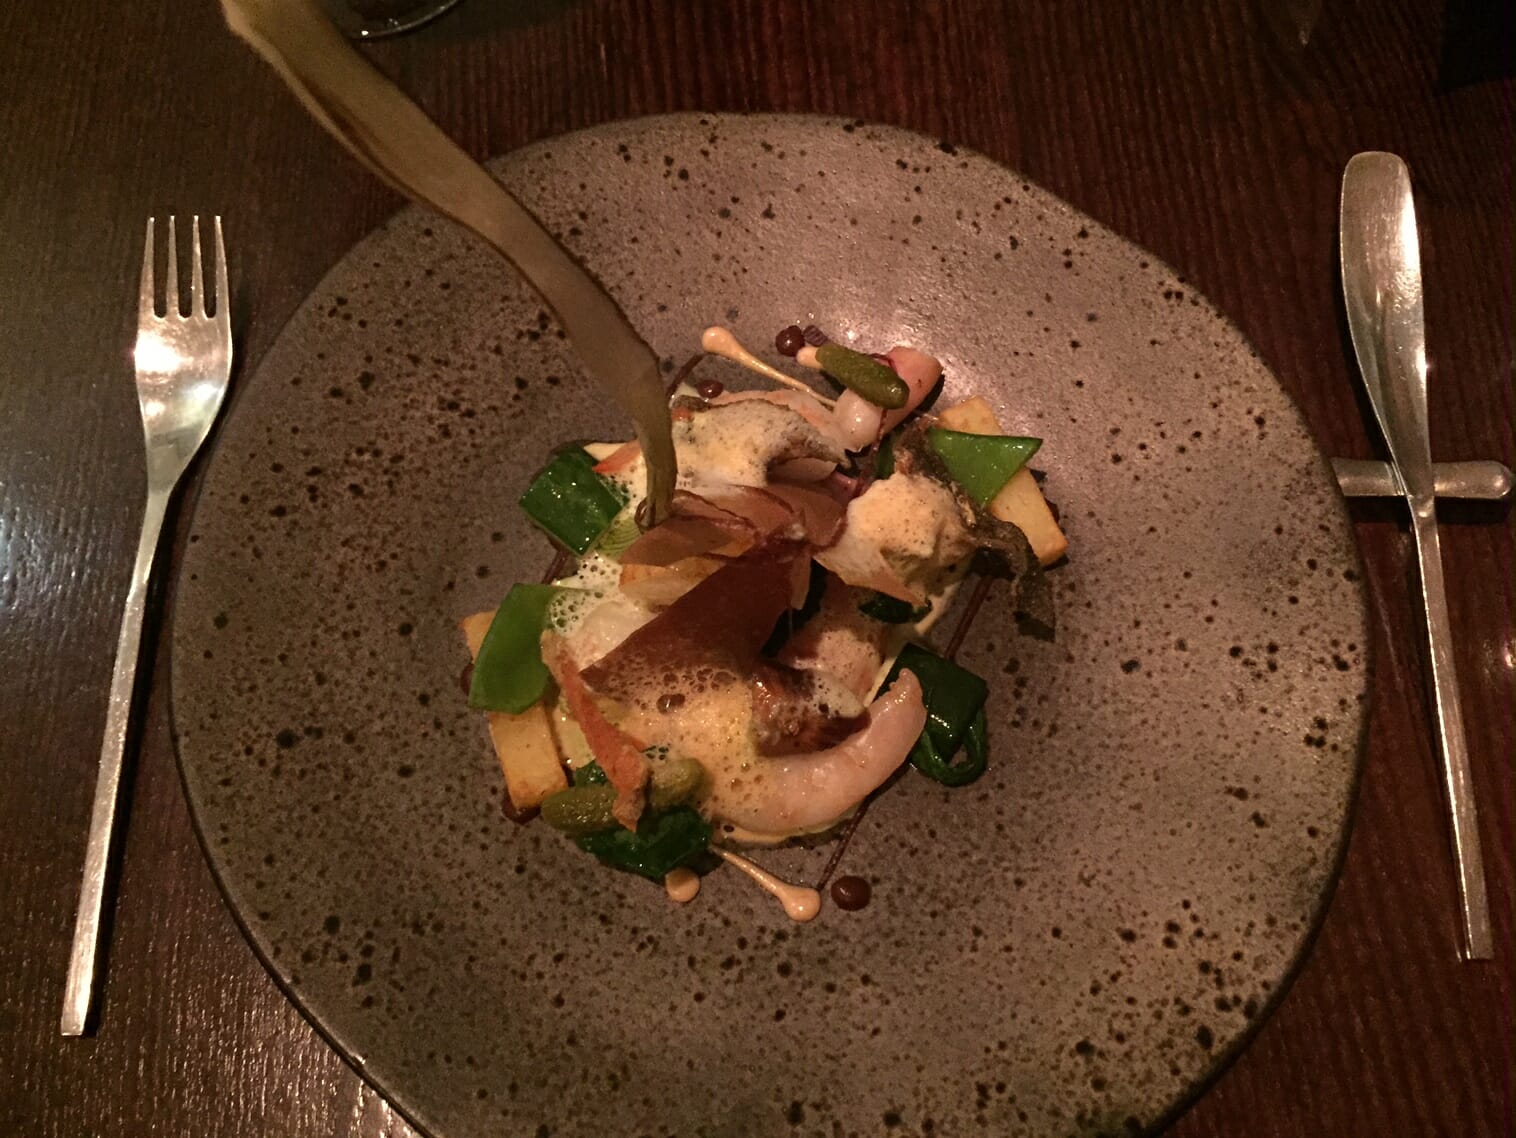 the main course served at 21212 Restaurant, one of the best restaurants in Edinburgh